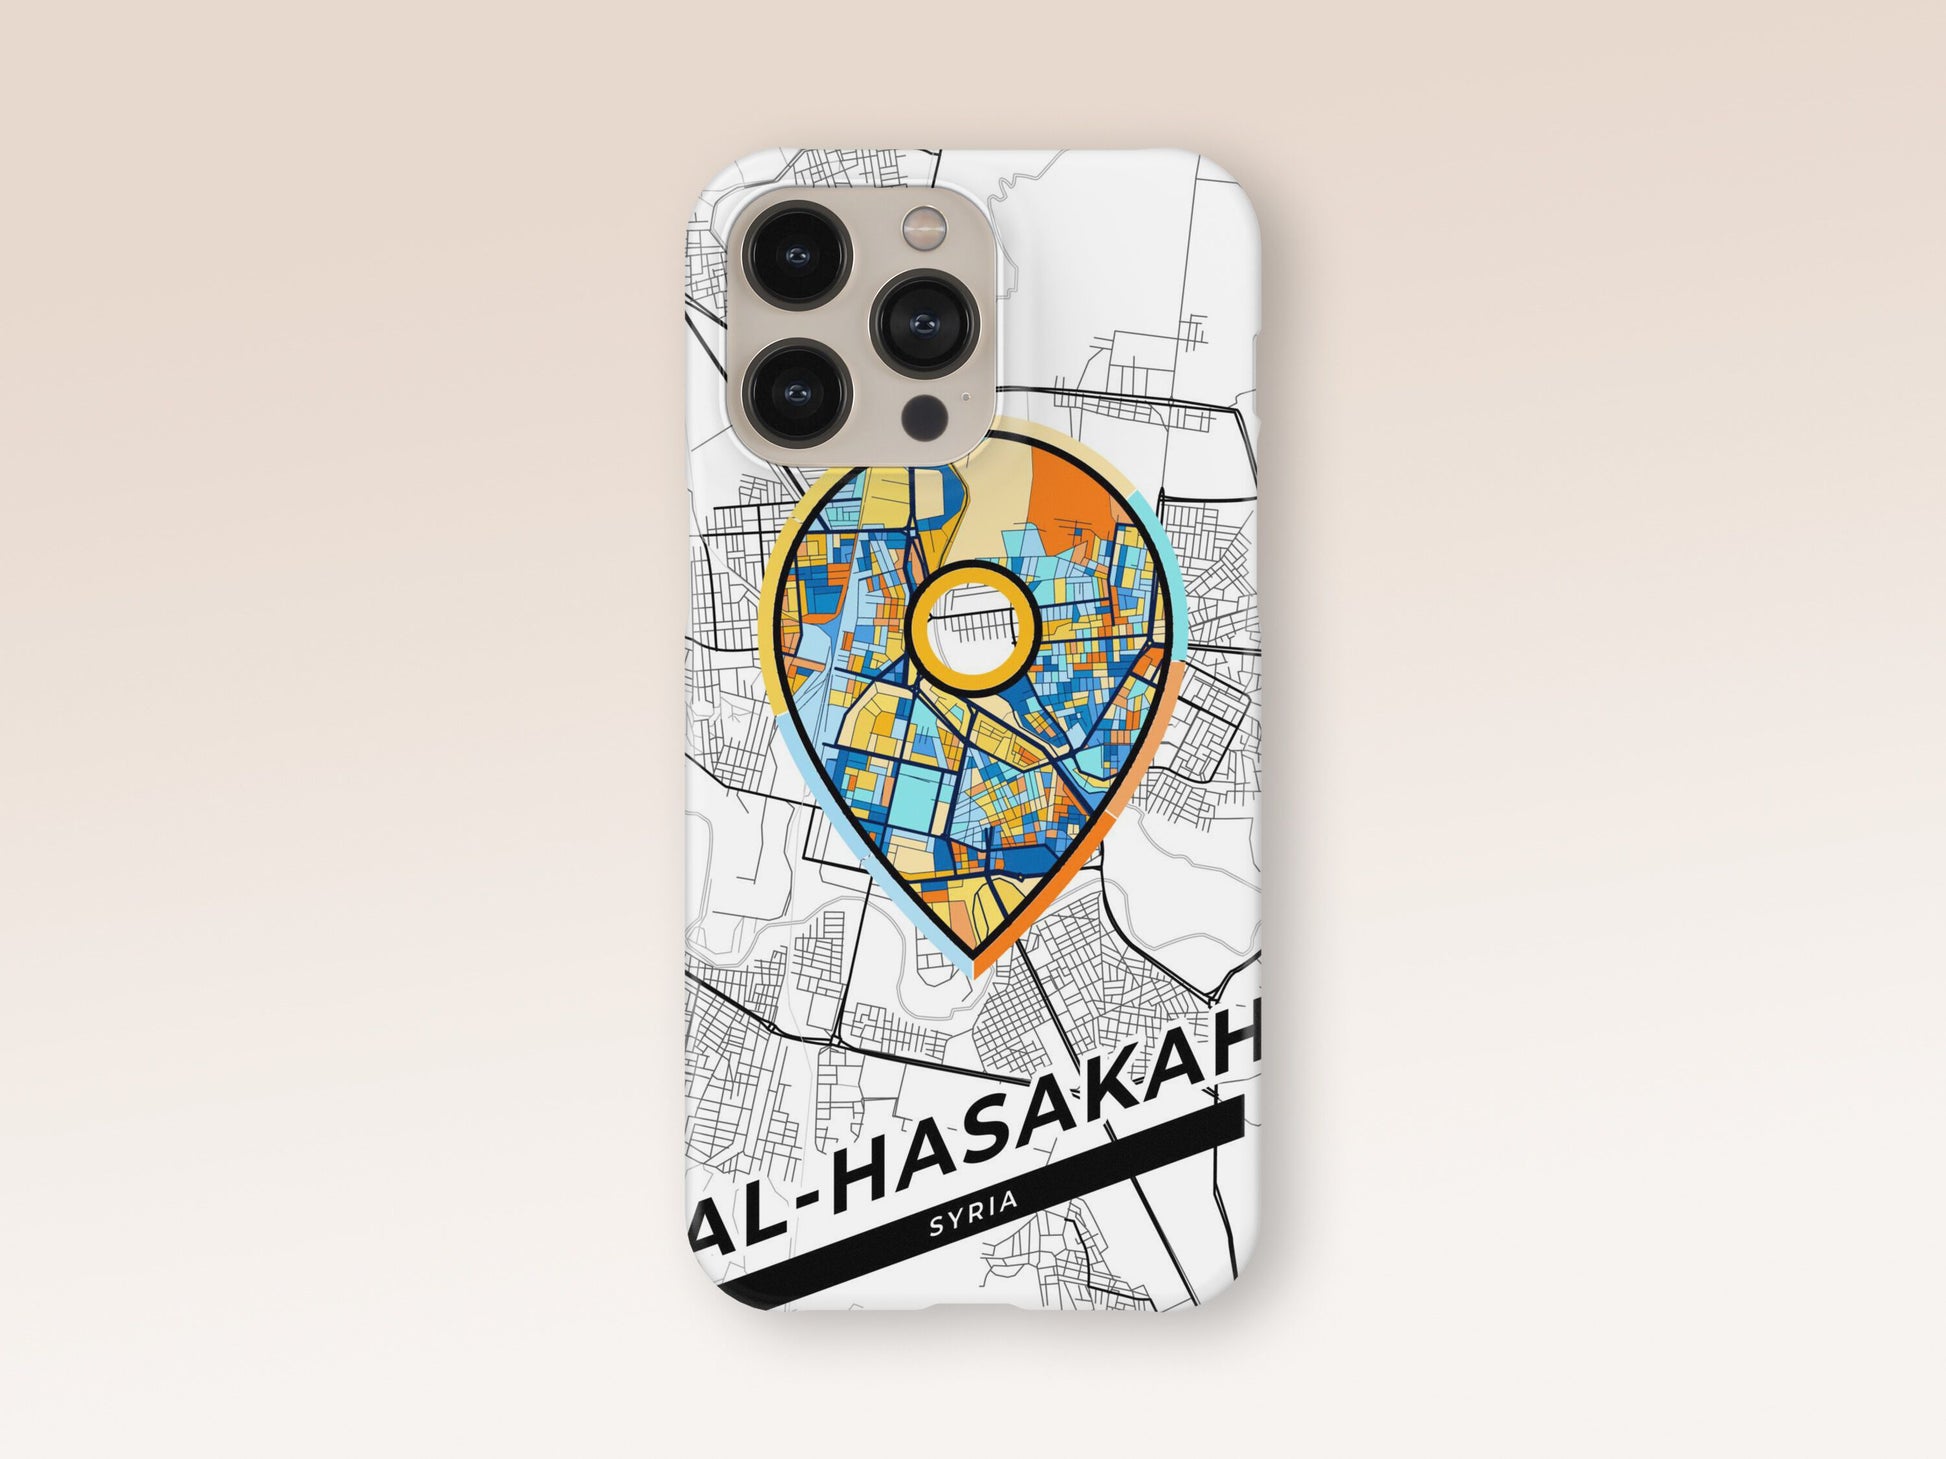 Al-Hasakah Syria slim phone case with colorful icon. Birthday, wedding or housewarming gift. Couple match cases. 1